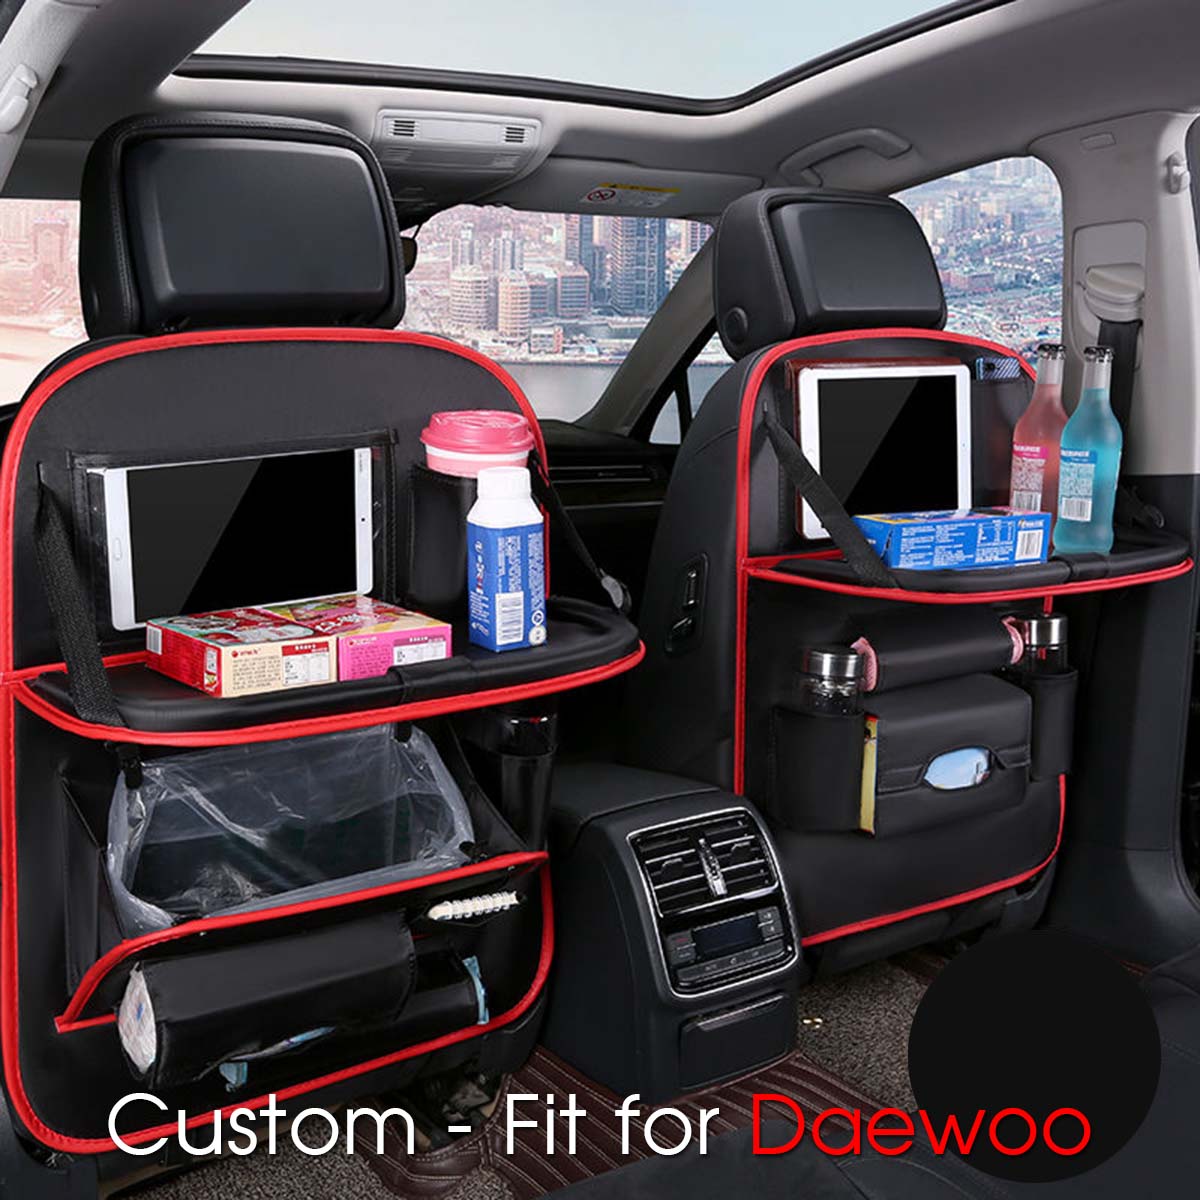 Backseat Organizer With Tablet Holder PU Leather, Custom Fit For Your Cars, Backseat Car Organizer, Car Seat Back Protectors Kick With Foldable Table Tray Car Seat Organizer, Car Accessories DA15987